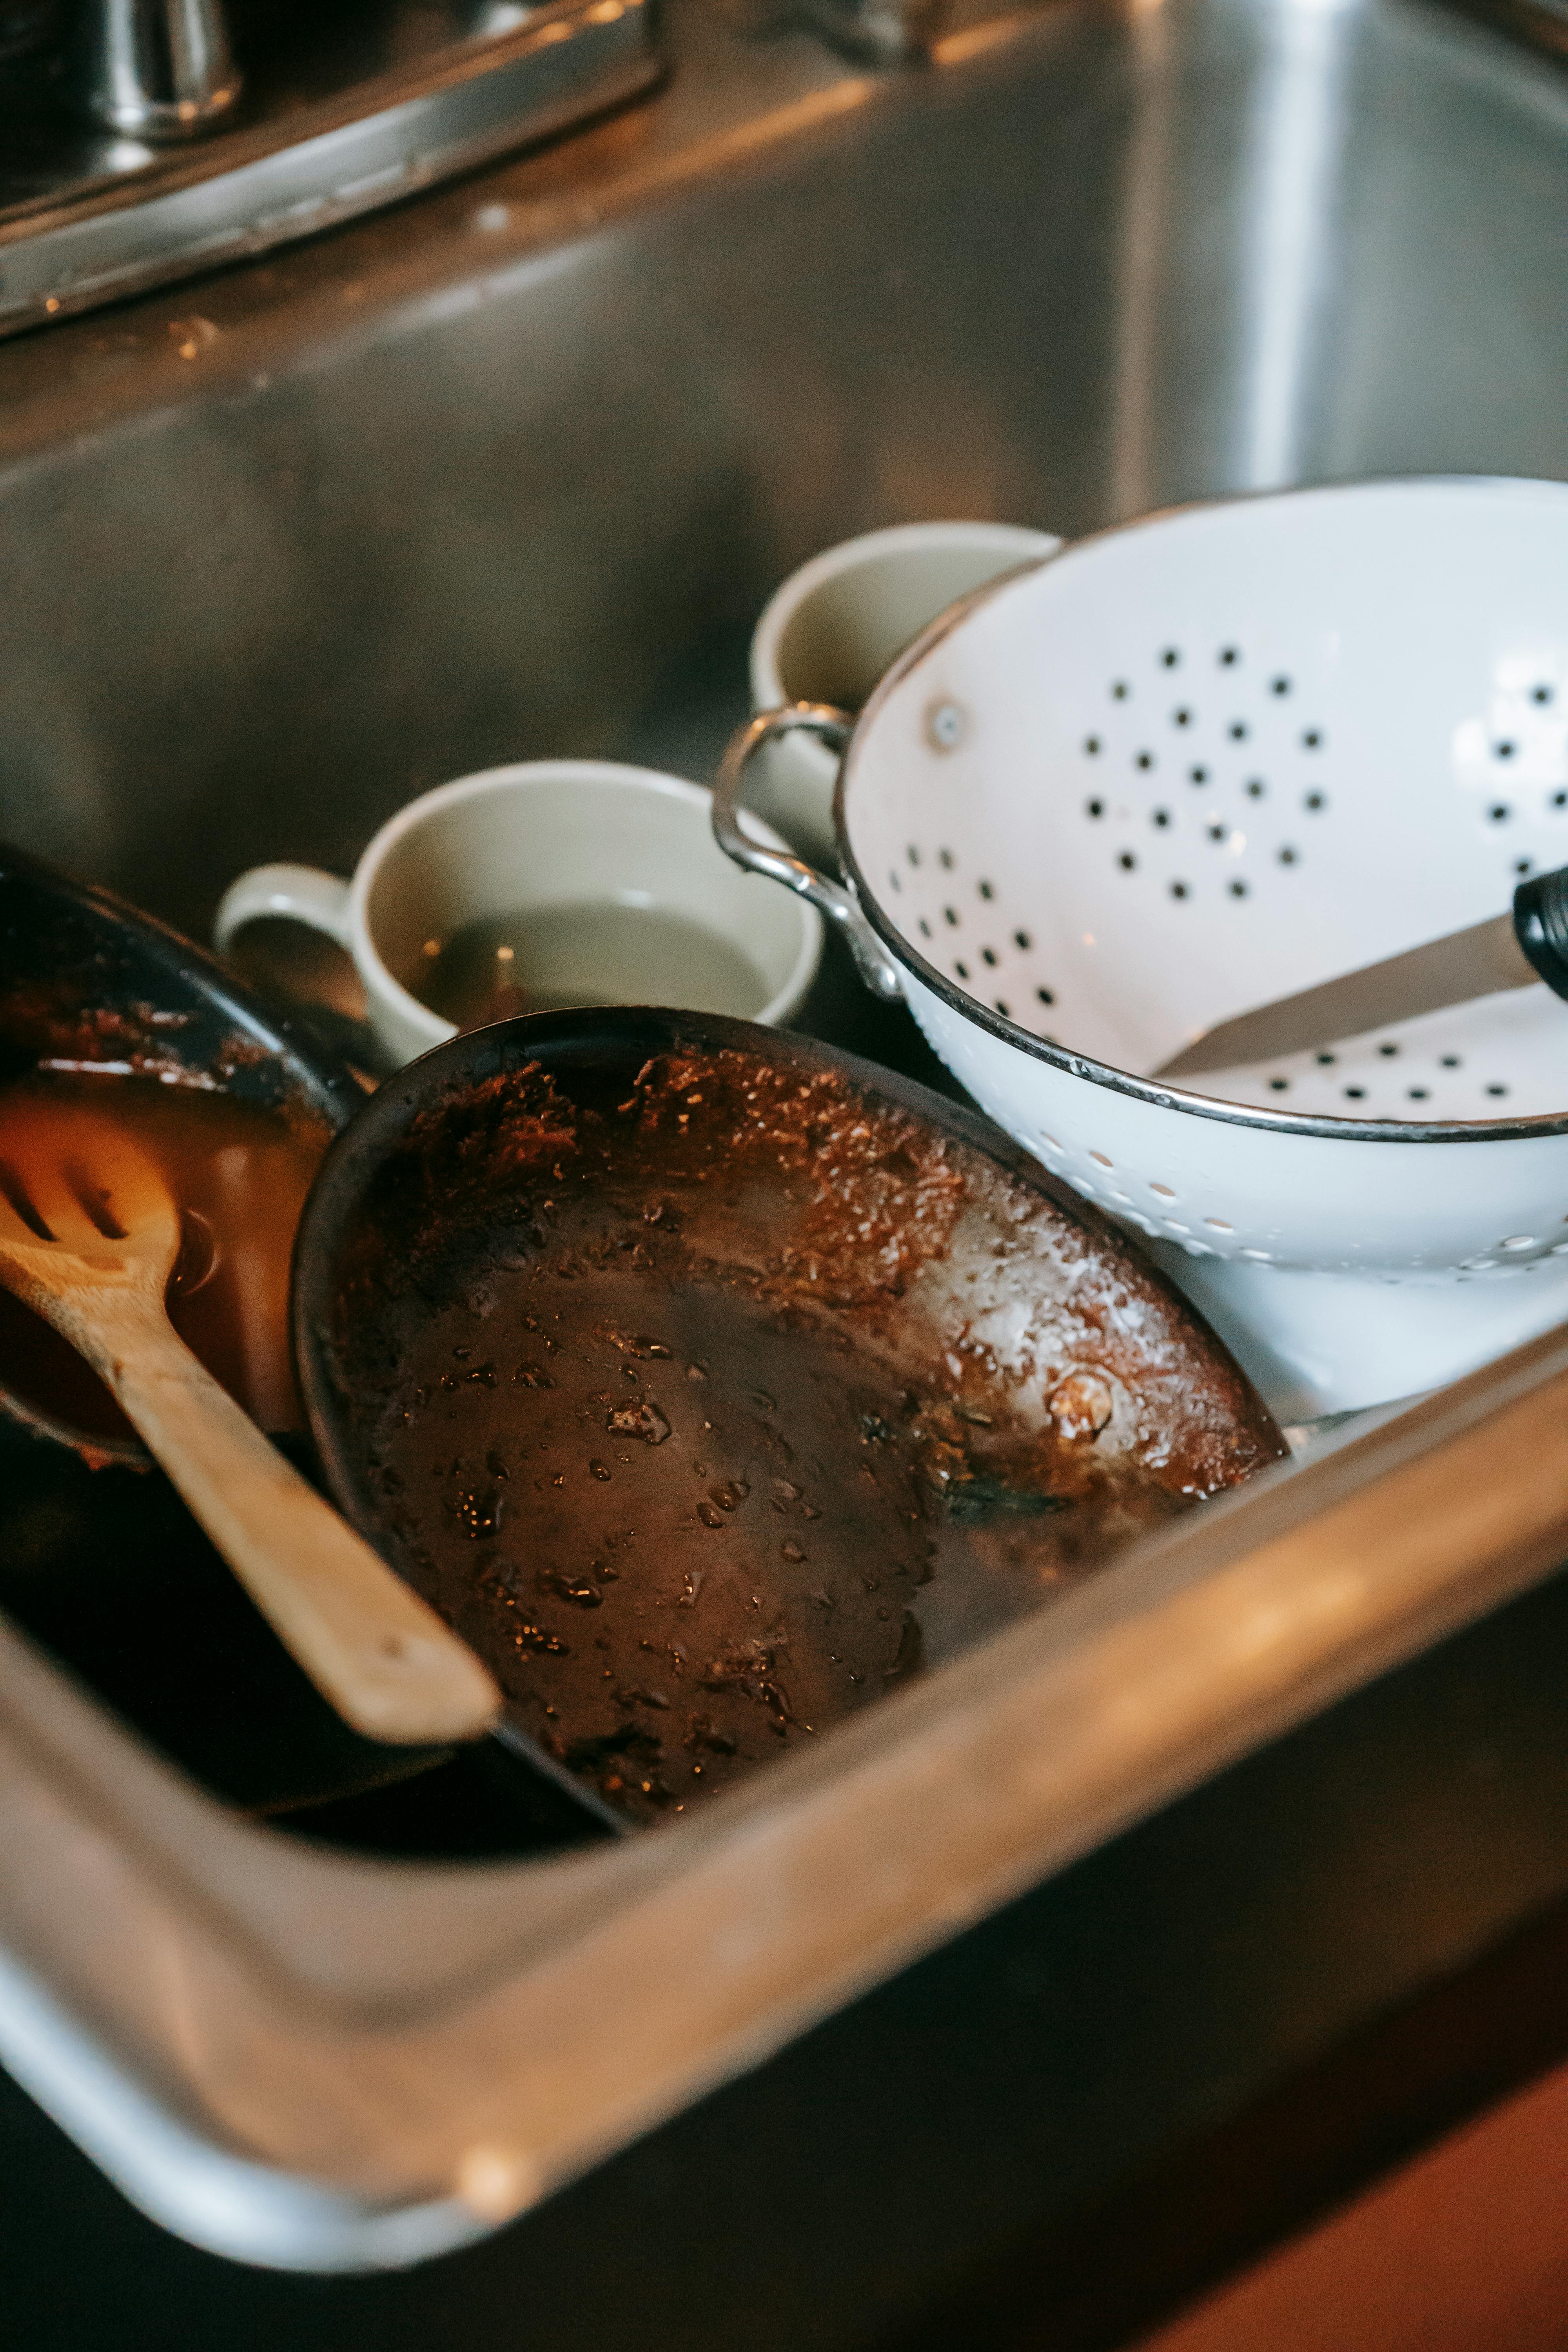 A kitchen sink full of dishes | Source: Pexels